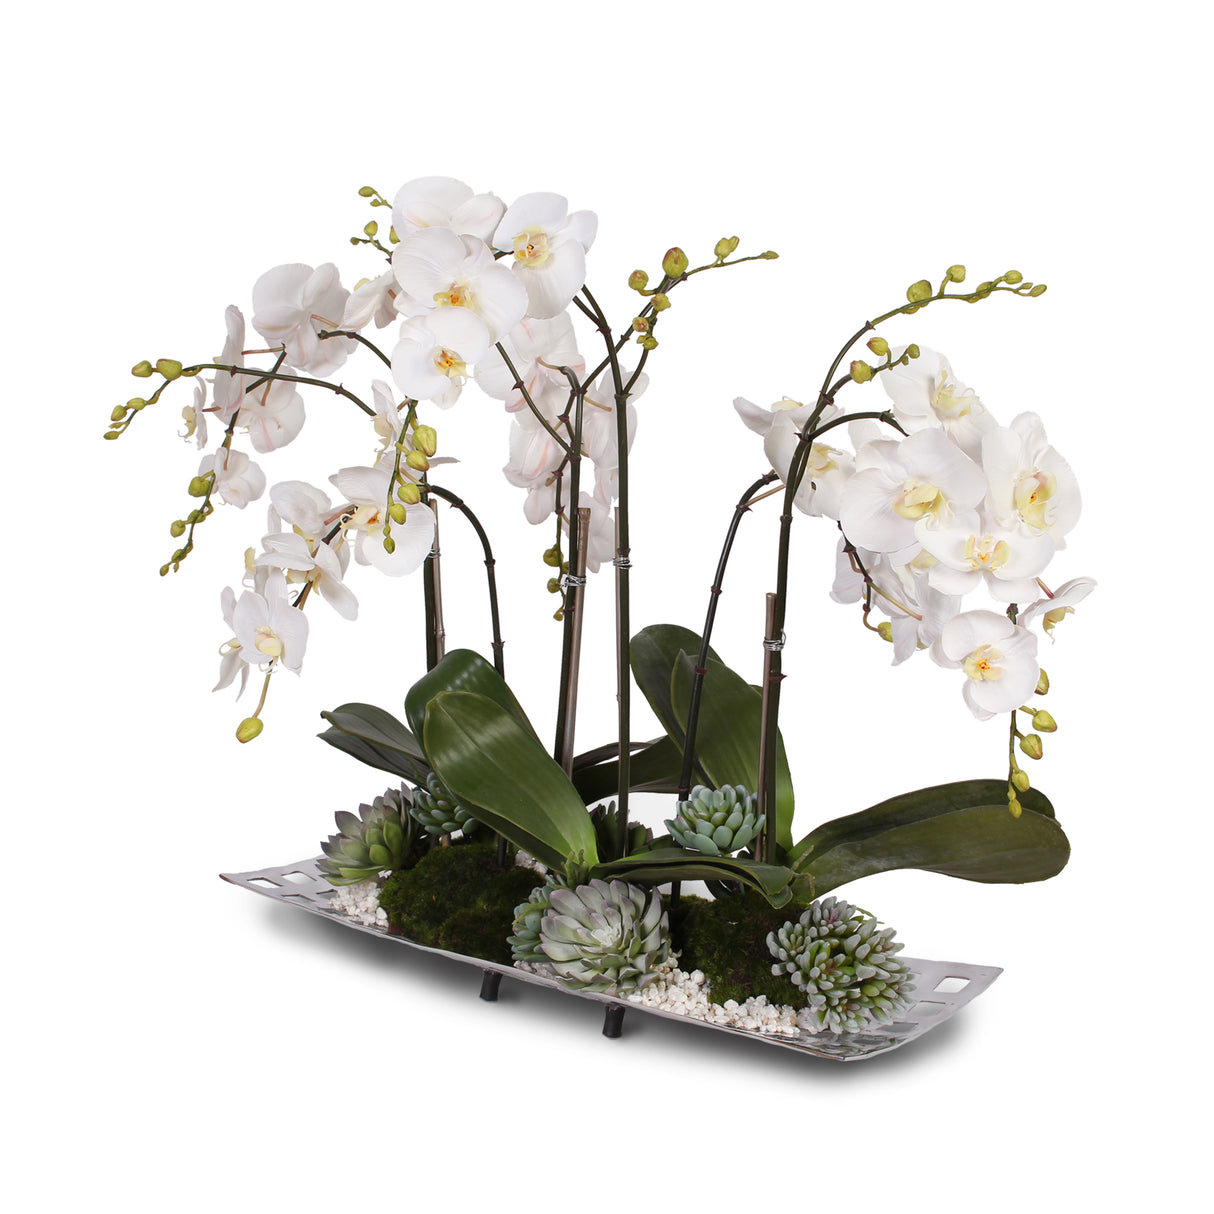 Jenny Silks Real Touch White Phalaenopsis Orchids with Succulents and White Pebbles in Aluminum Tray #F-55